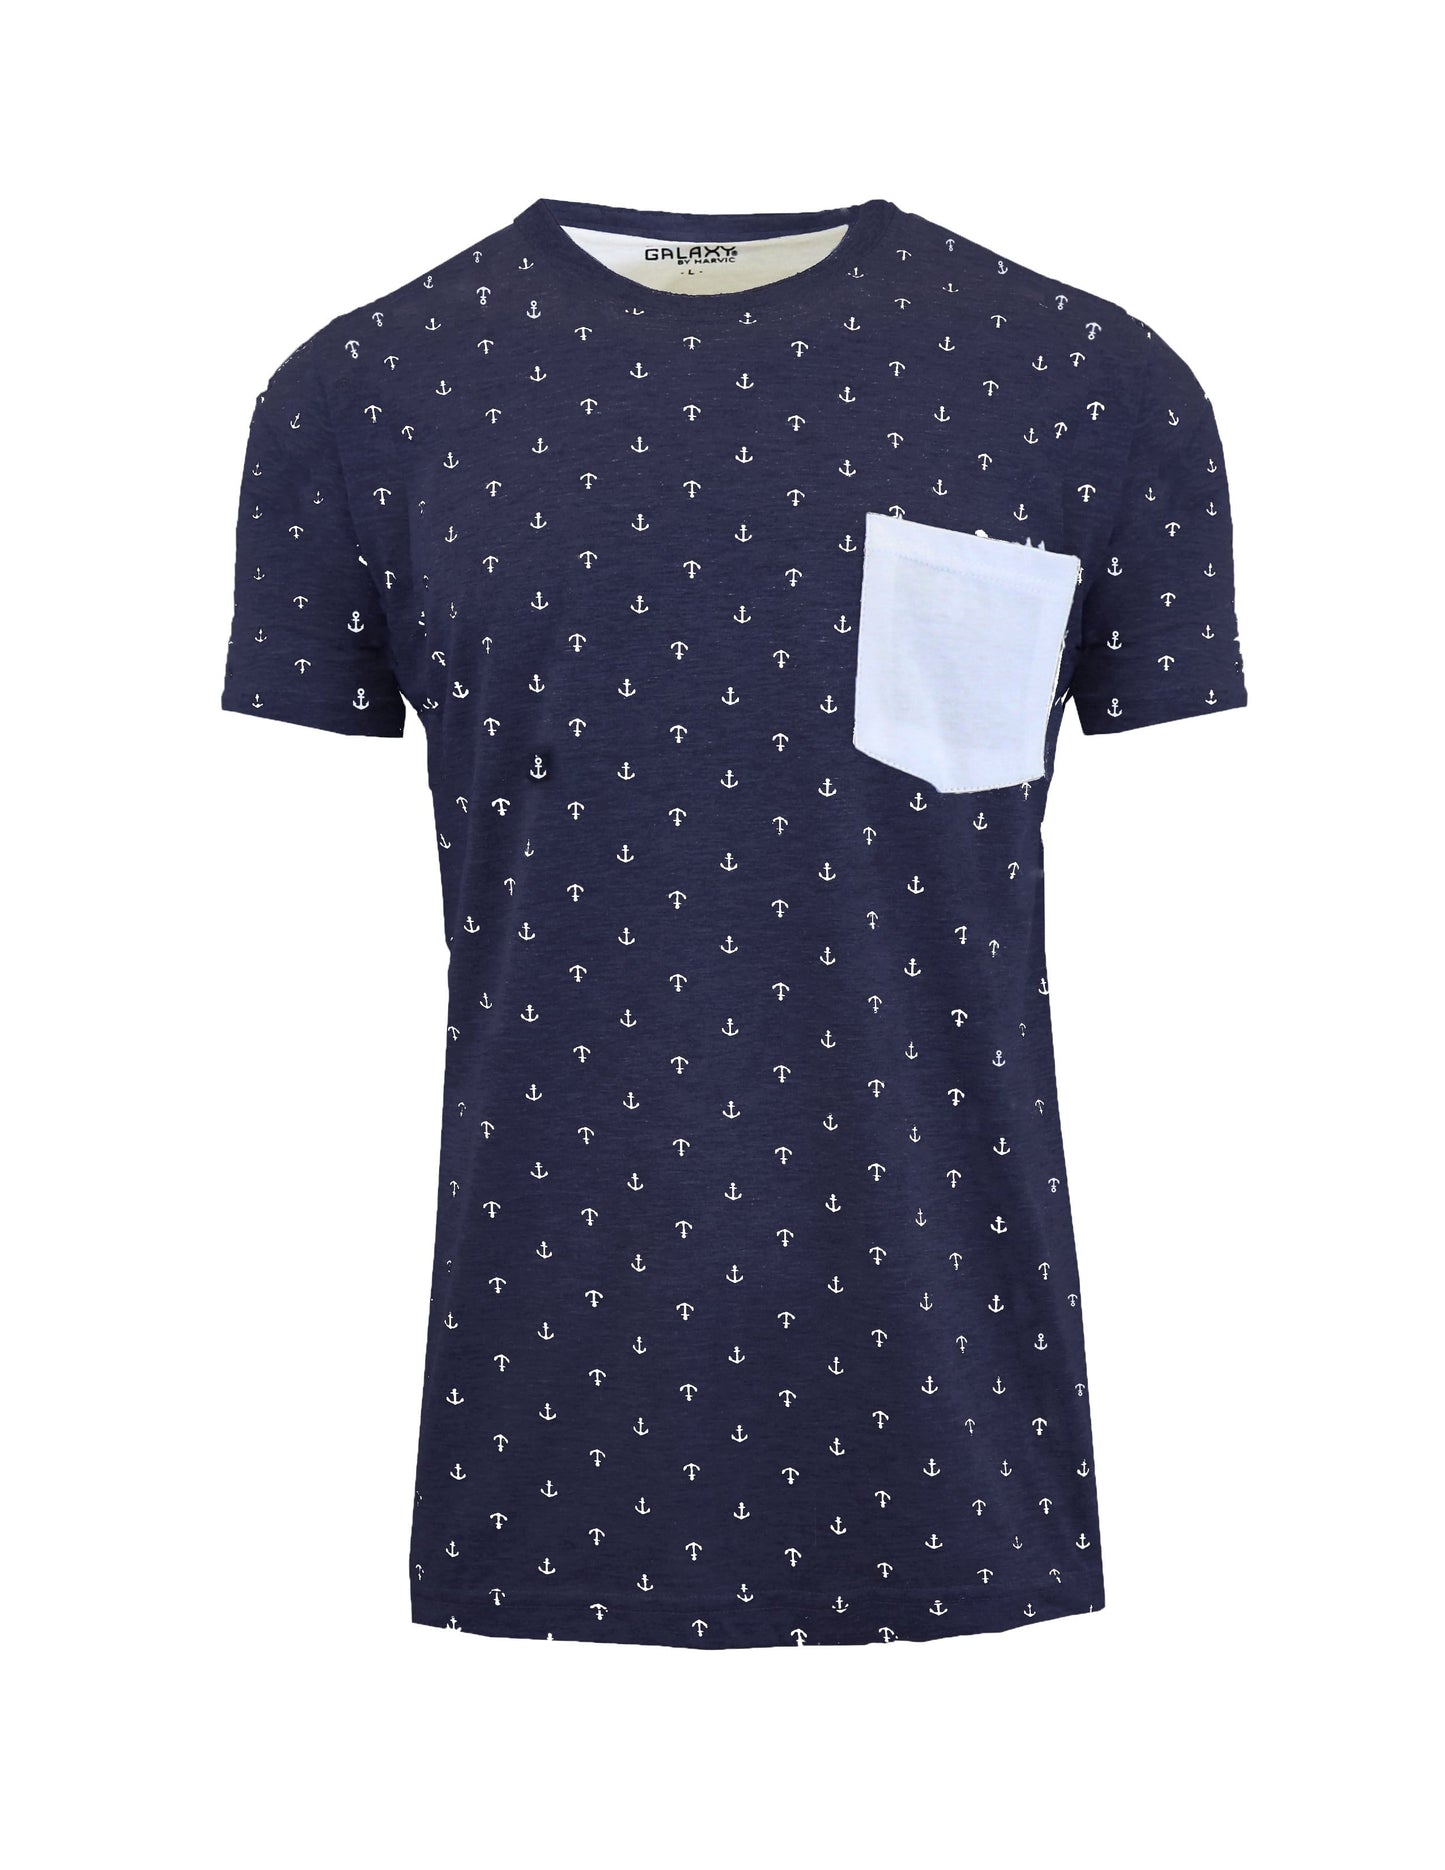 Men's Anchor Printed Tee with Chest Pocket - GalaxybyHarvic